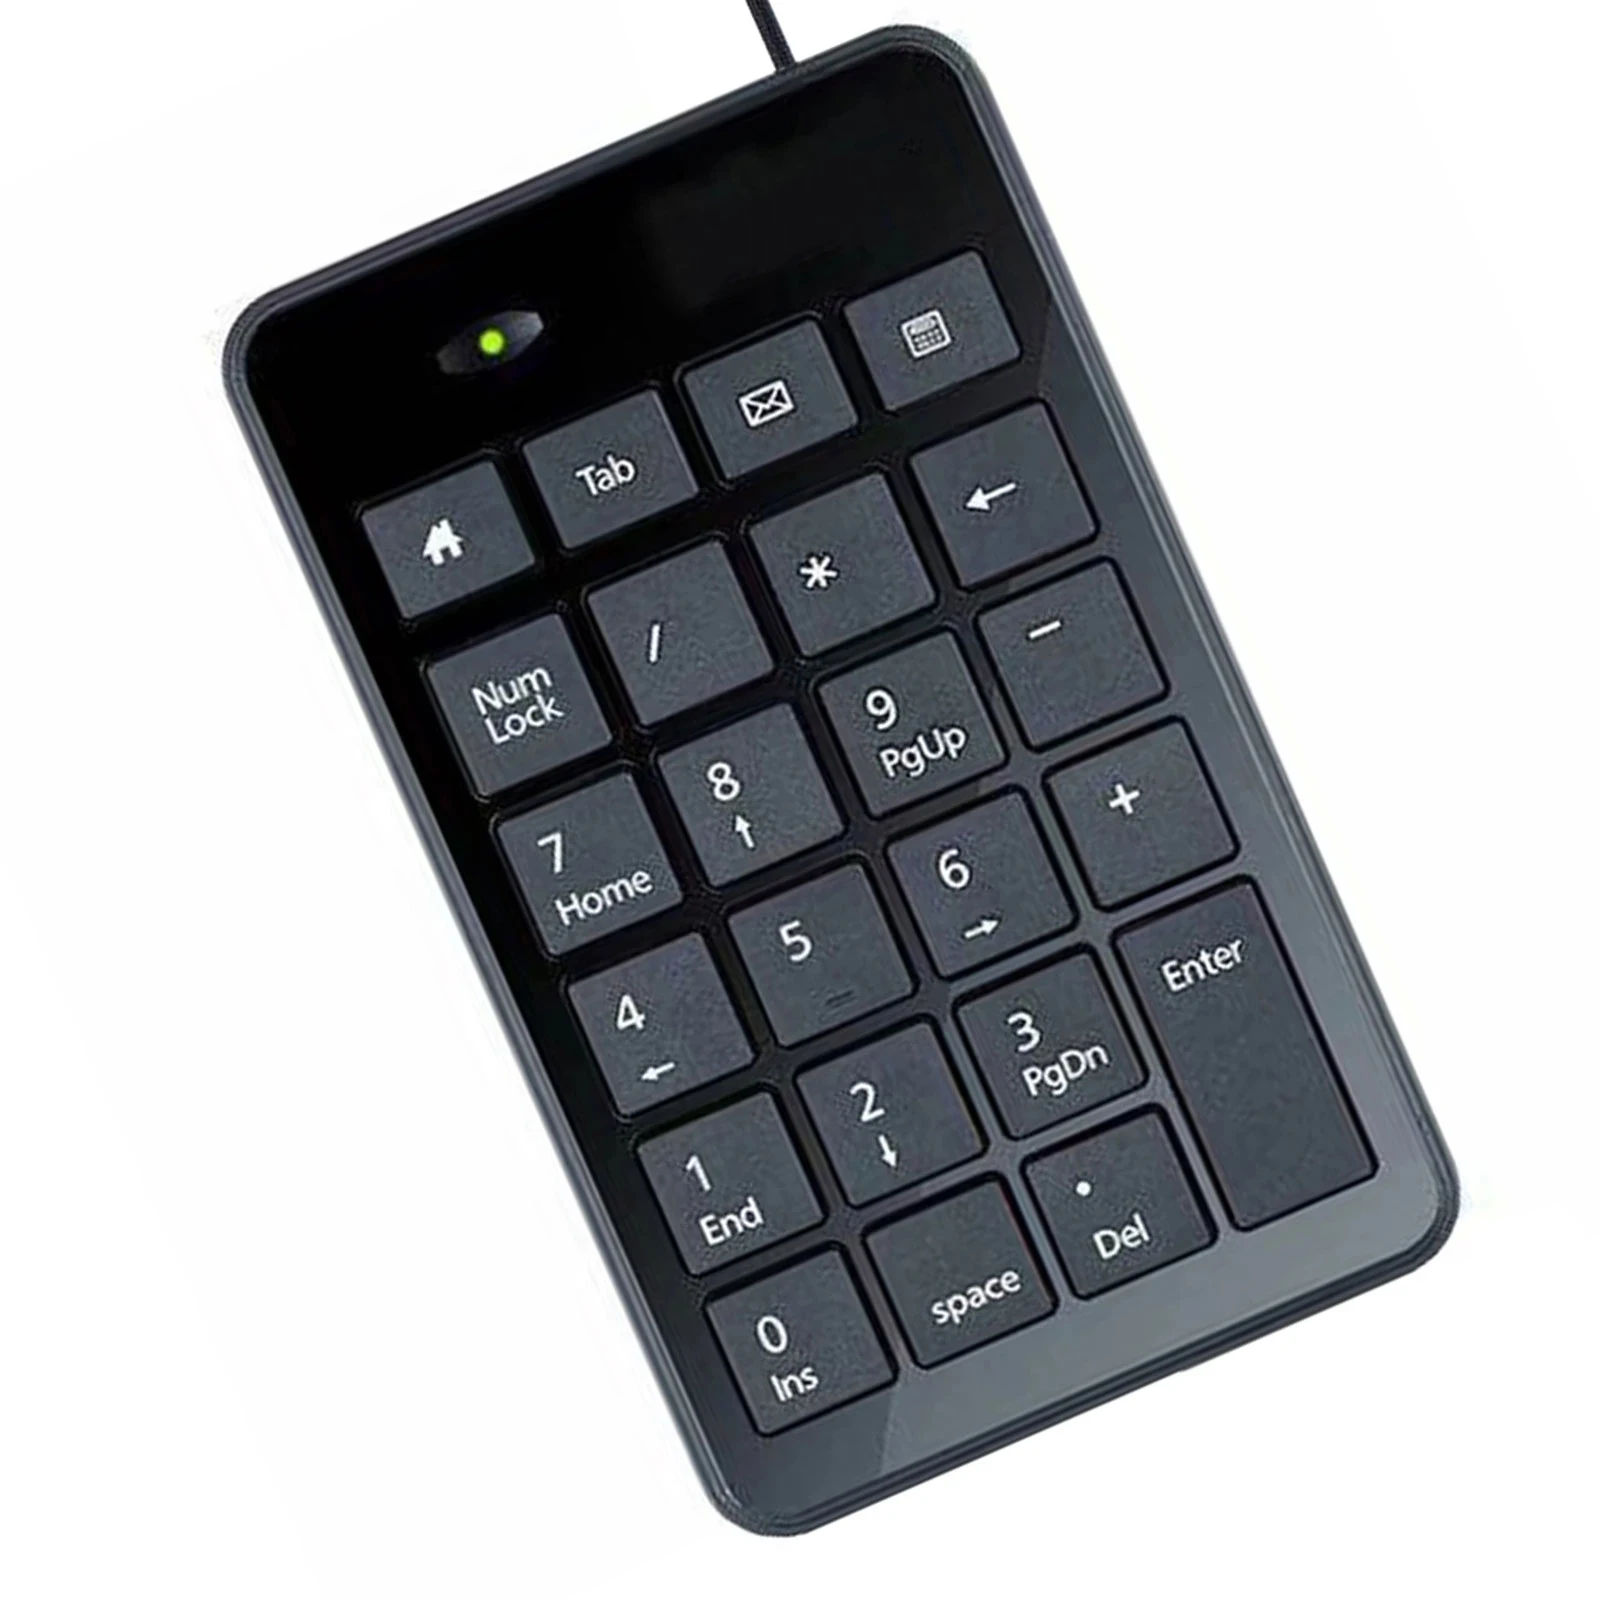 

Number Pad For Laptop Mini Compact Numeric Keyboard With 23 Keys For Fast Financial Accounting Wired Compact Number Key External